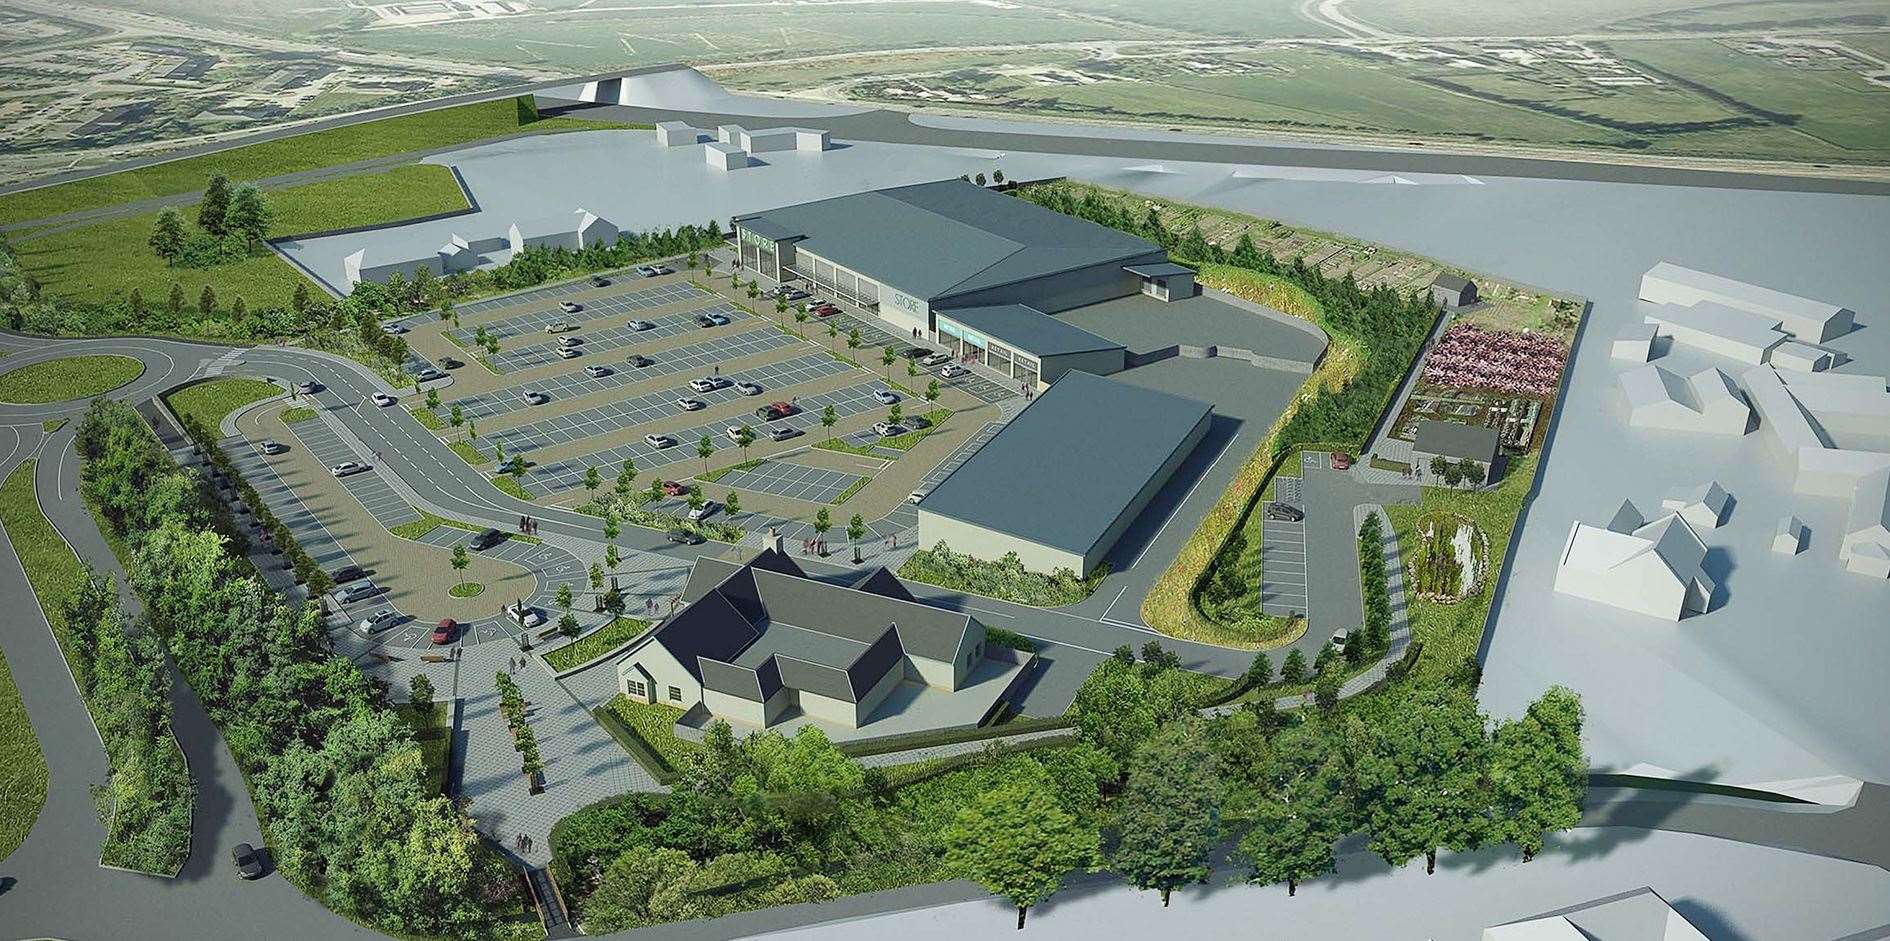 Plans have been submitted for a major expansion of the Inshes Retail Park in Inverness.